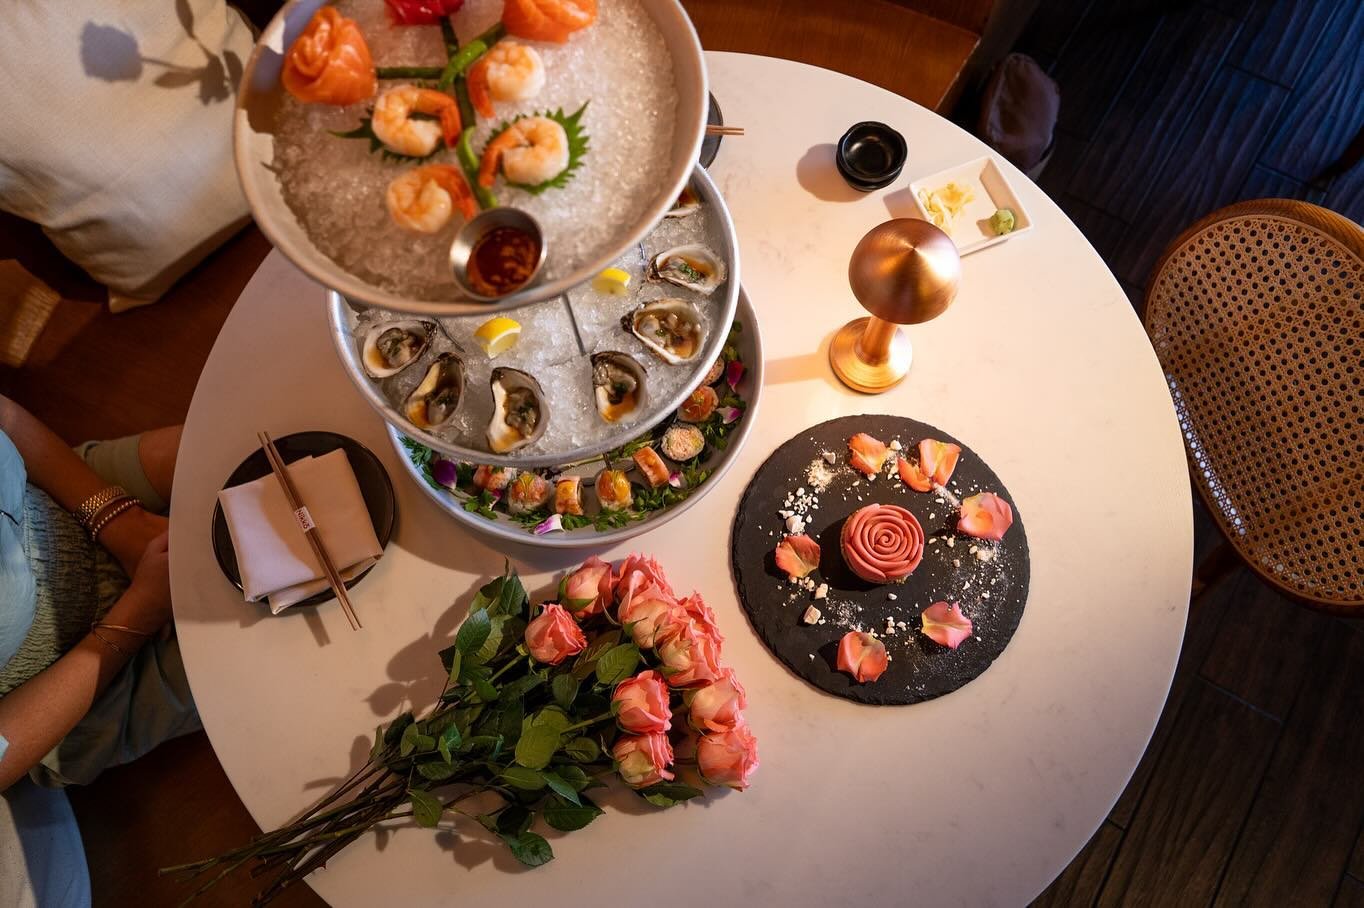 Only one week until Mother&rsquo;s Day! 🌸 Our Mother&rsquo;s Day celebration kicks off this weekend, May 10-12, with a can&rsquo;t-miss special just for her. 

For $150, you can enjoy our Sushi and Oyster tower, pistachio mousse rose cake, and compl